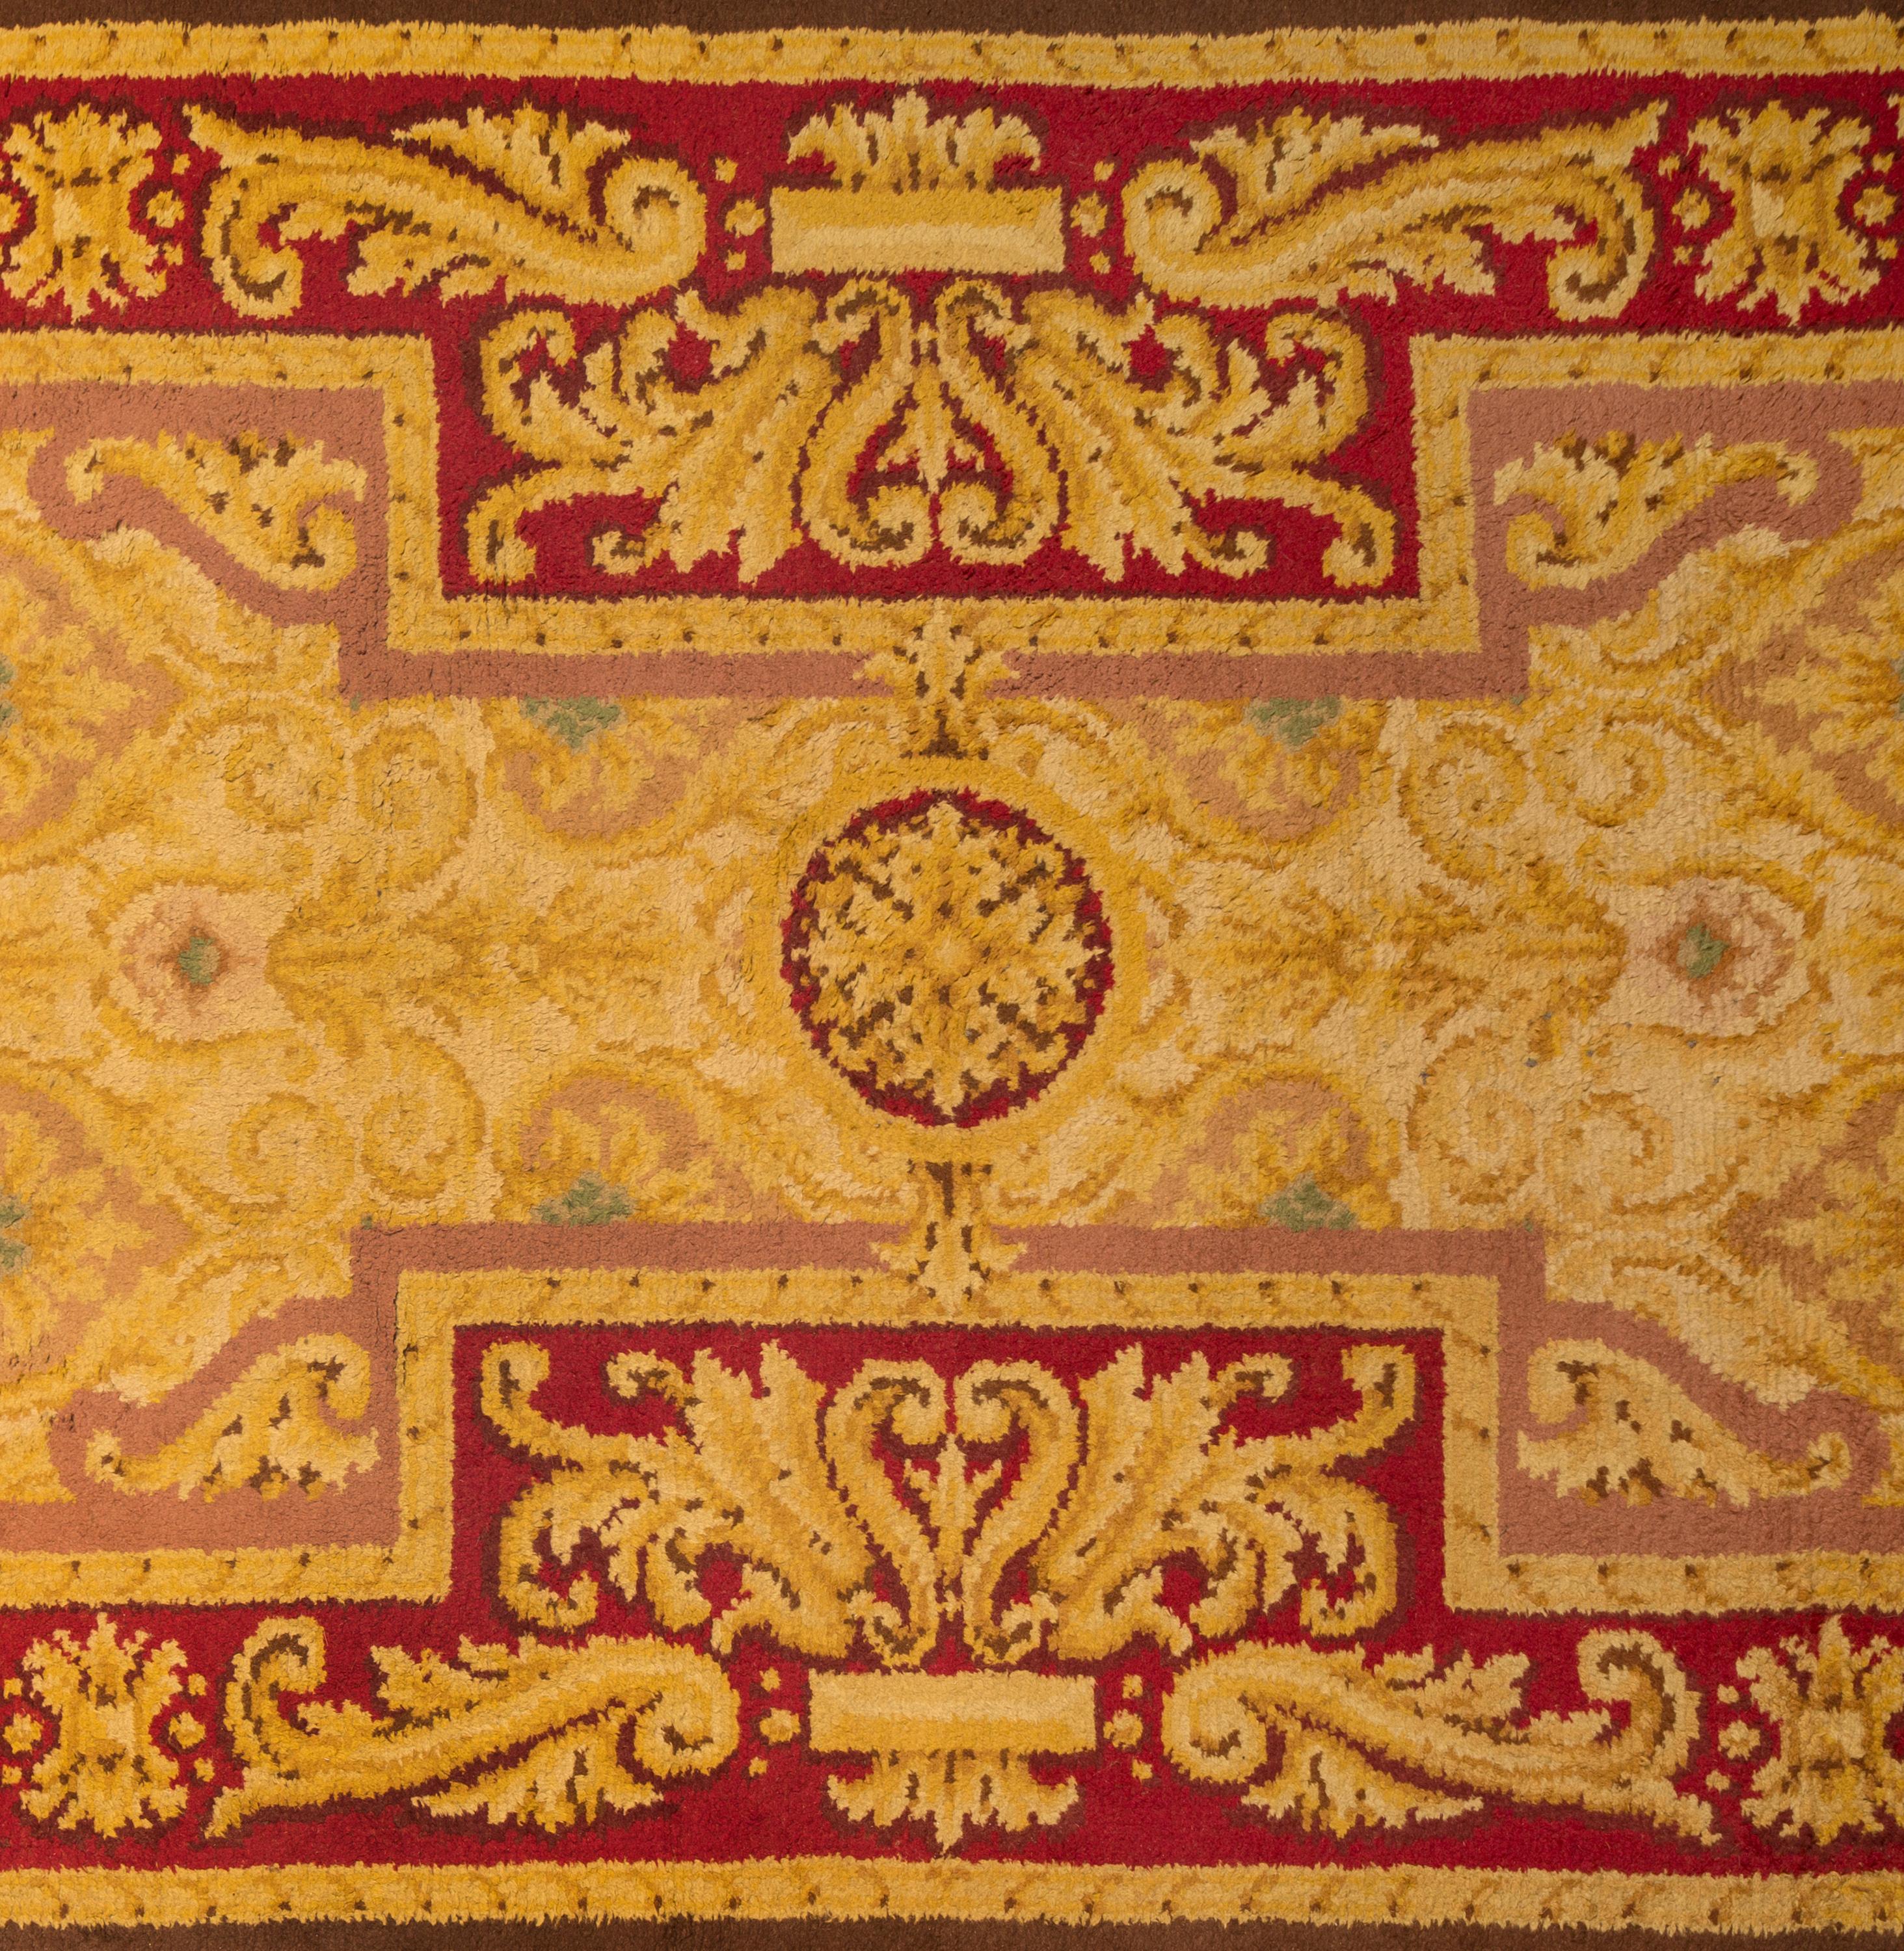 Acquired from an important estate some years ago in Madrid, this grand scale (6.4 meters / 21 feet long) neoclassical runner carpet once furnished the hallway or stairway of a notable aristocratic palace in the city center. According to expert